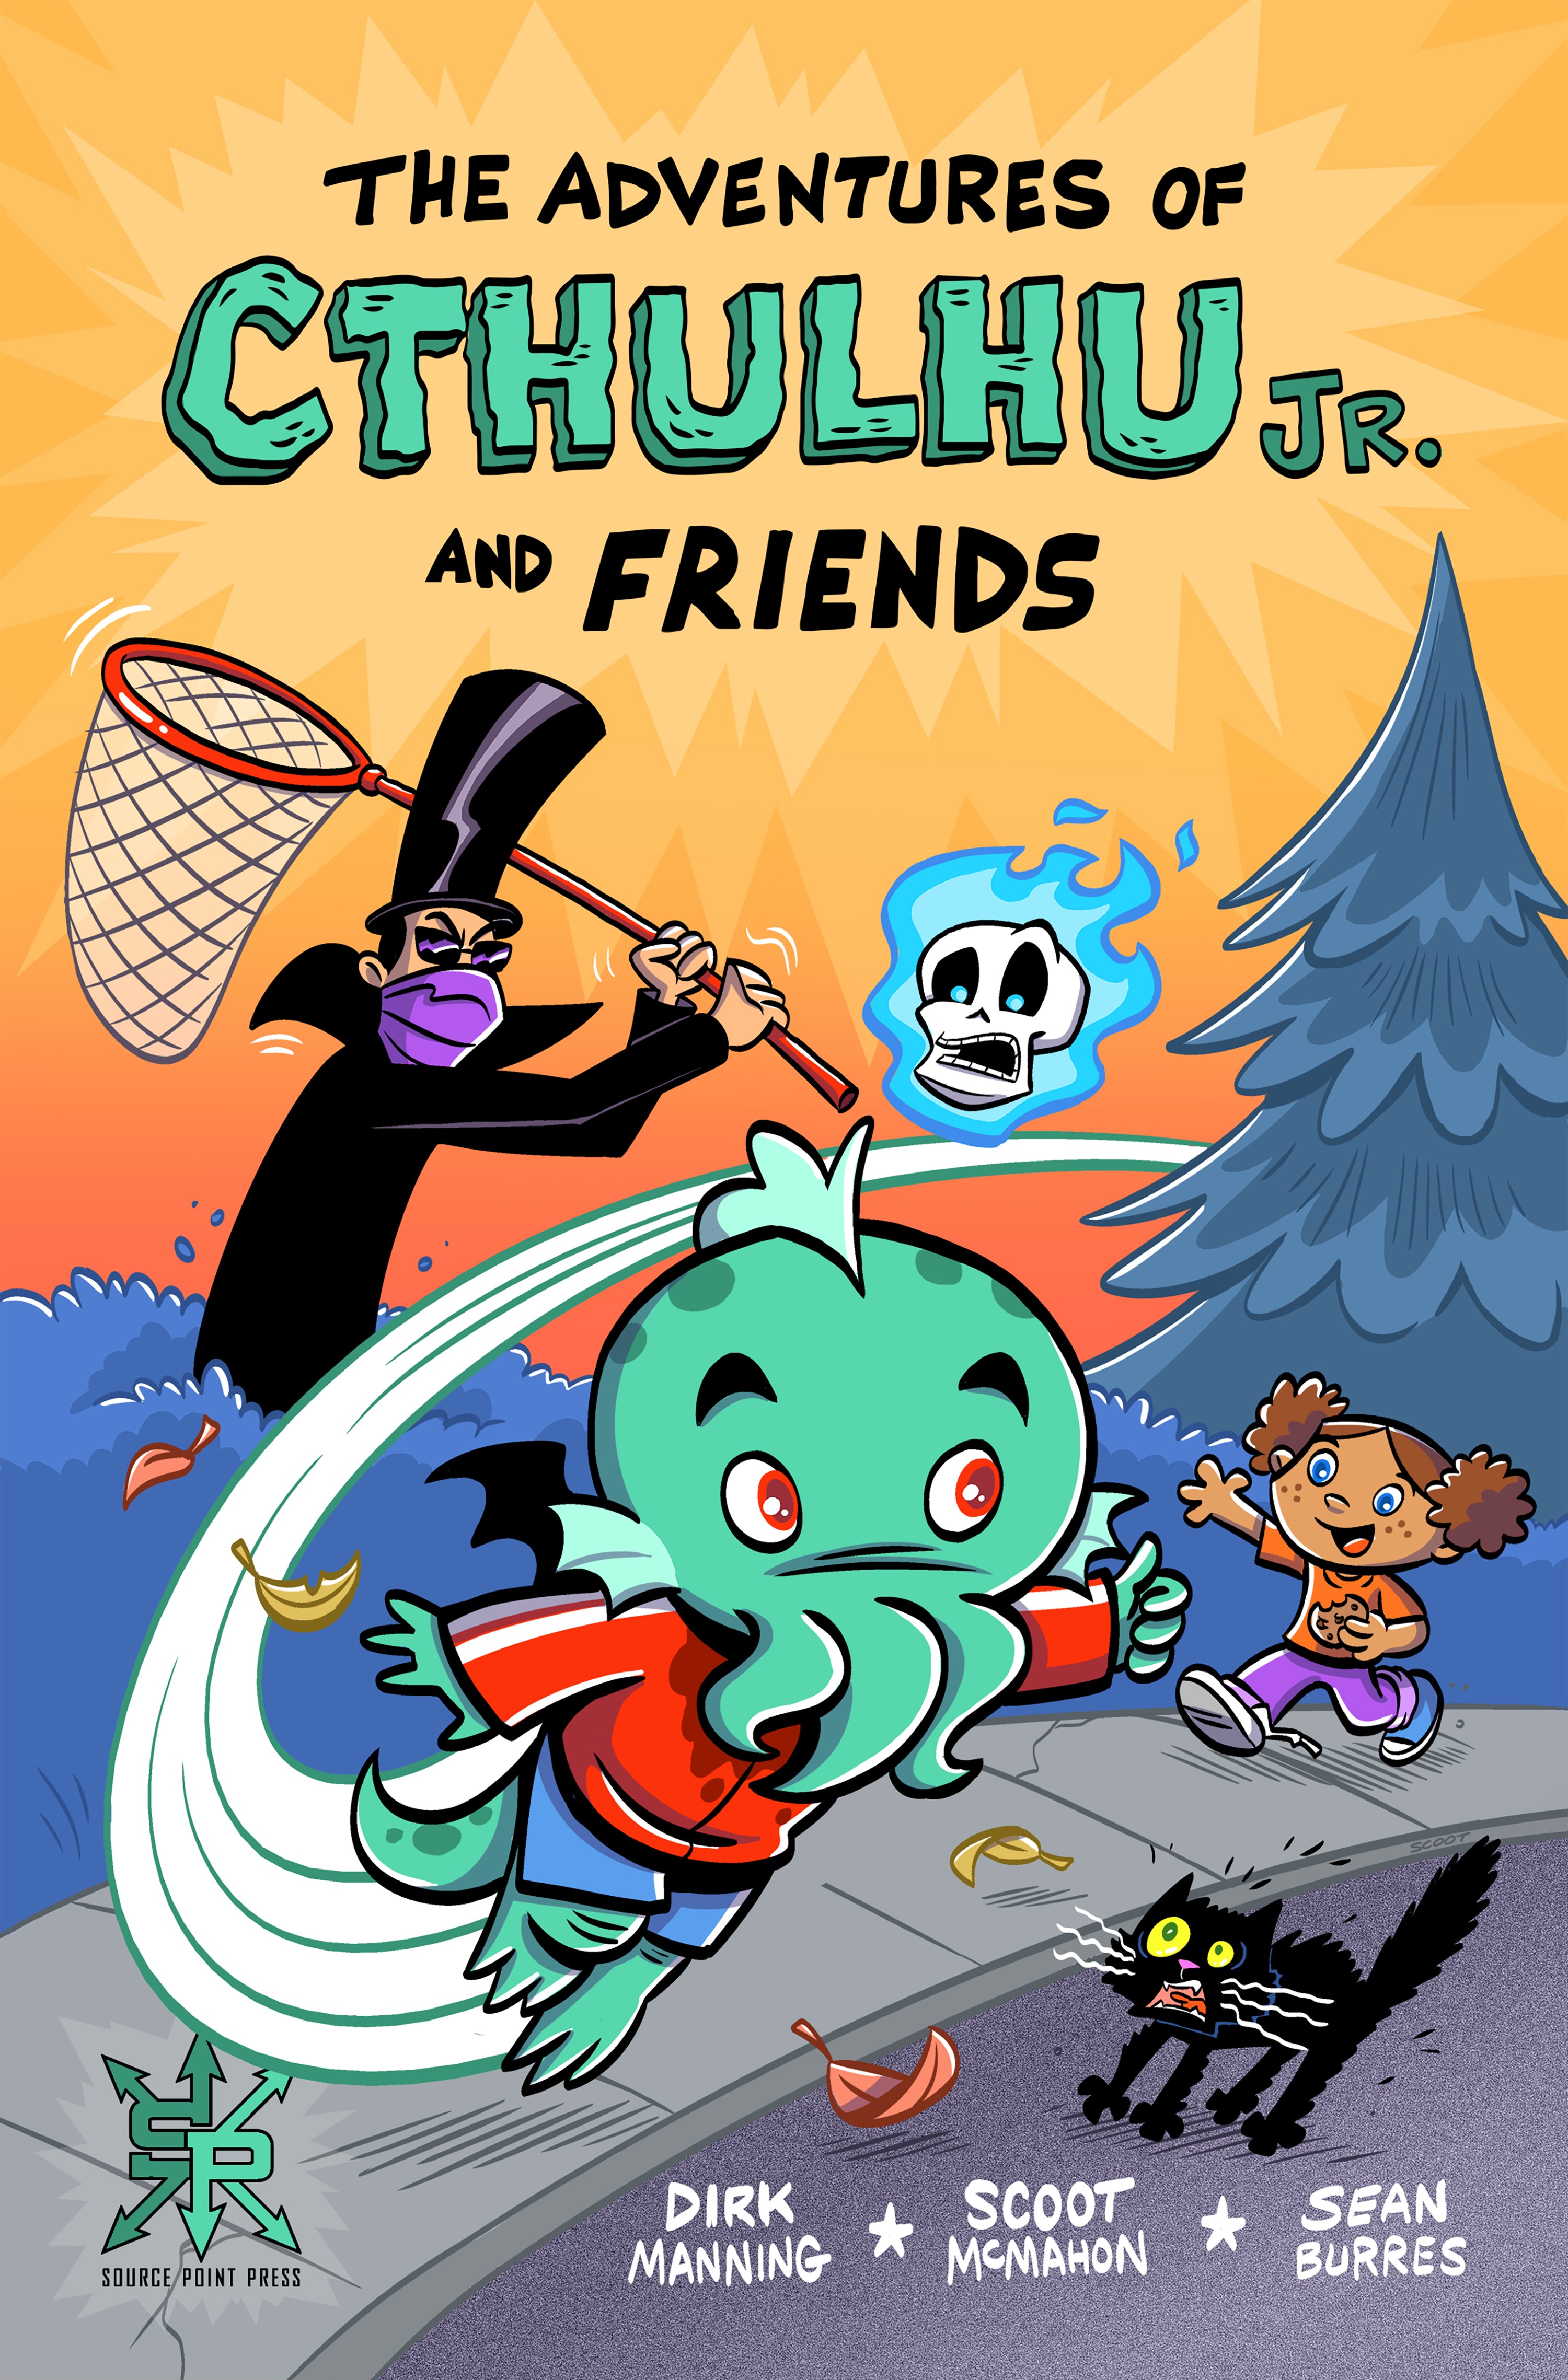 ADVENTURES OF CTHULHU JR AND FRIENDS TRADE PAPERBACK